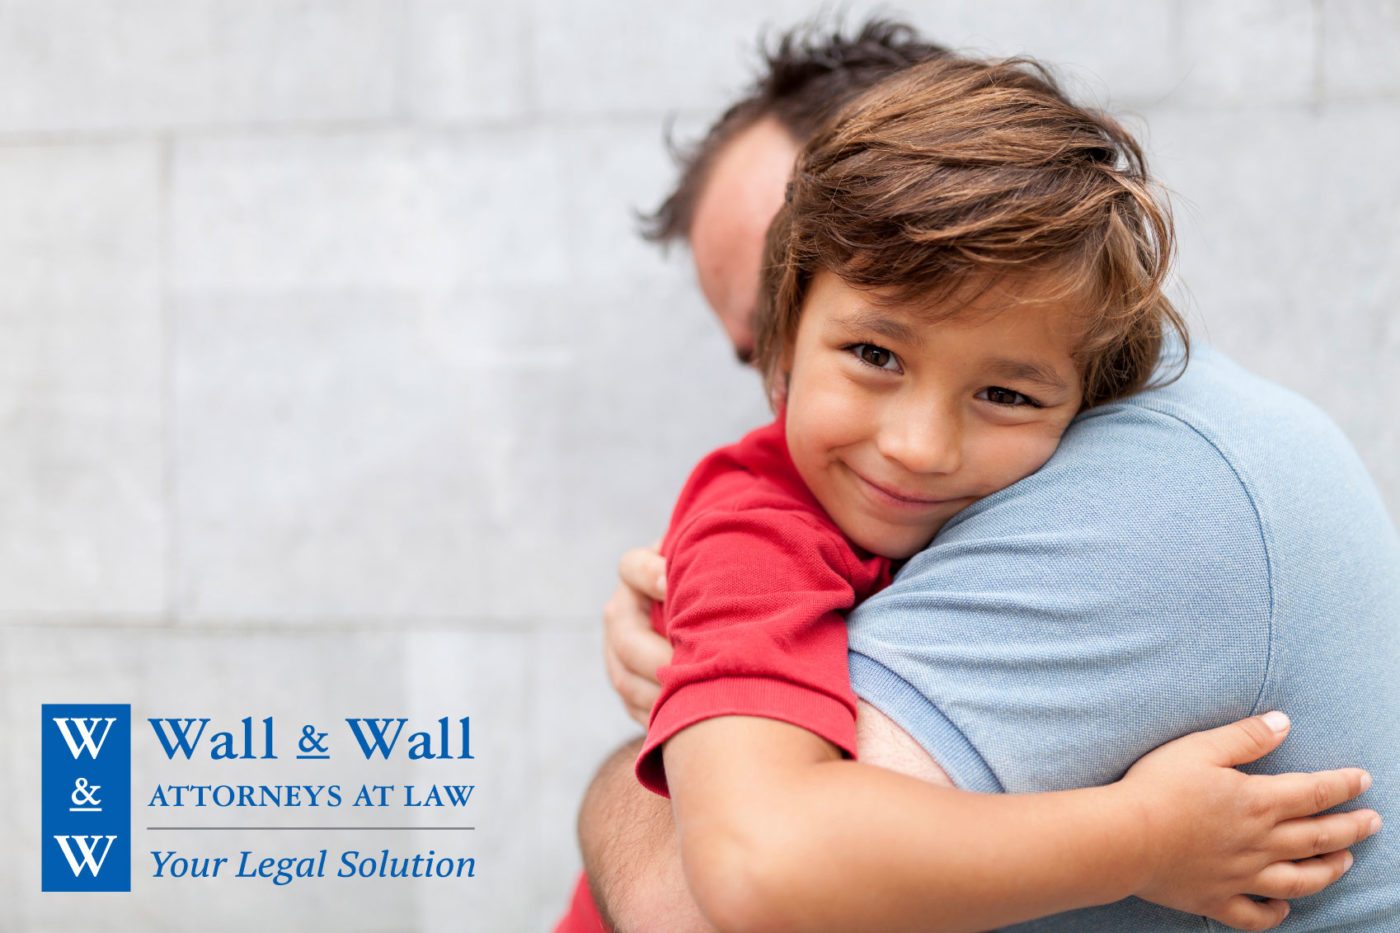 Introducing kids to new boyfriend - Wall & Wall Legal Solutions